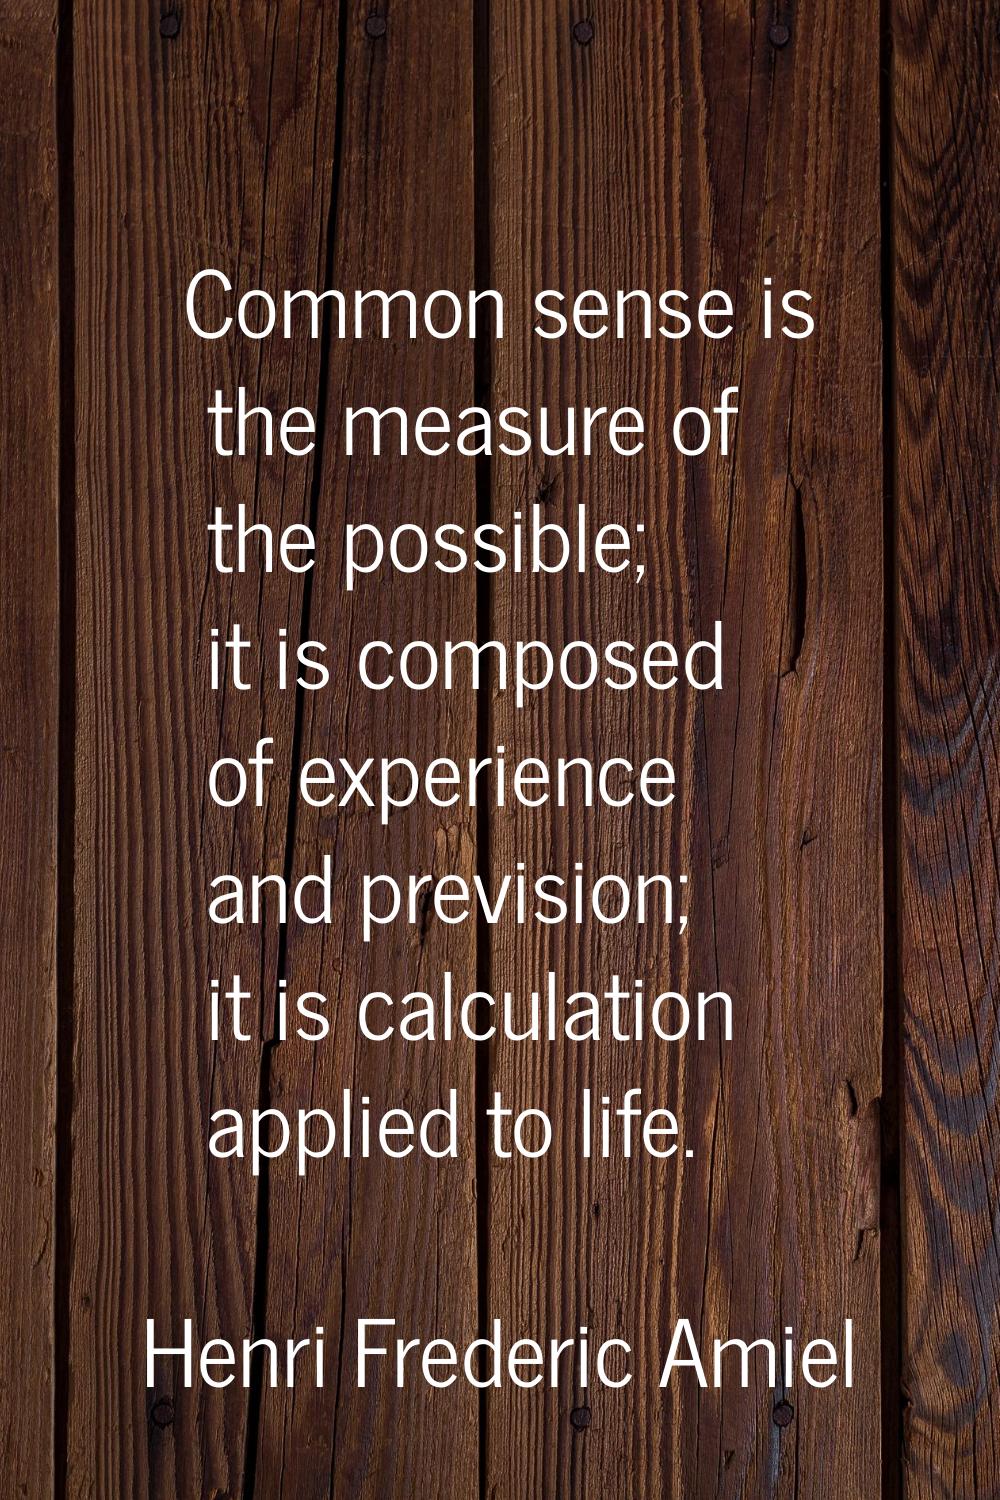 Common sense is the measure of the possible; it is composed of experience and prevision; it is calc